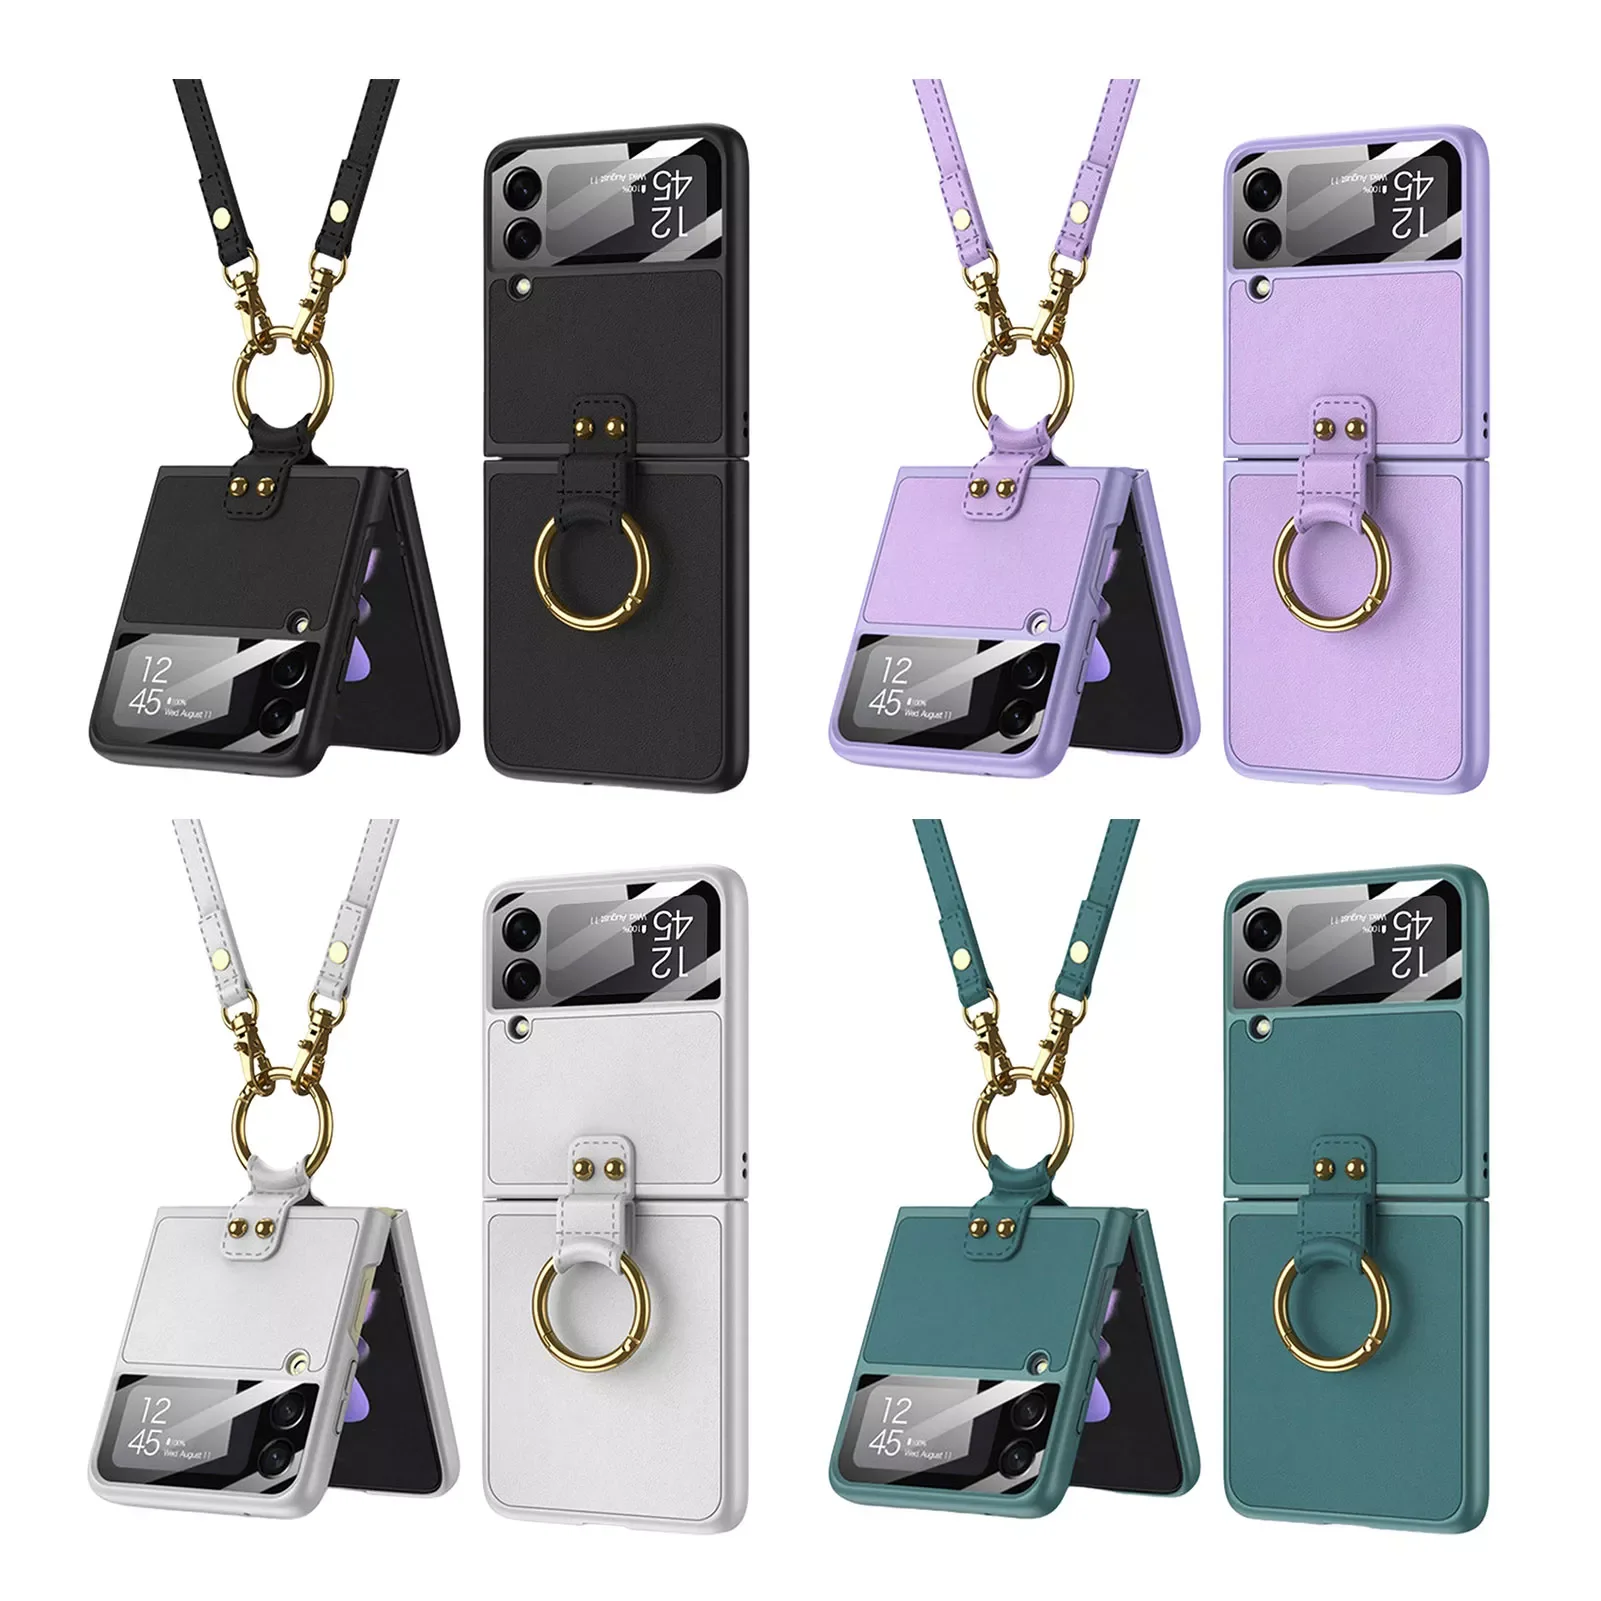 Phone Case  Z Flip 3 Folding Cell Phone PC Cover Anti-fall Anti-Slide Mobile Phone Shell For Z Flip 3 Case Accessory